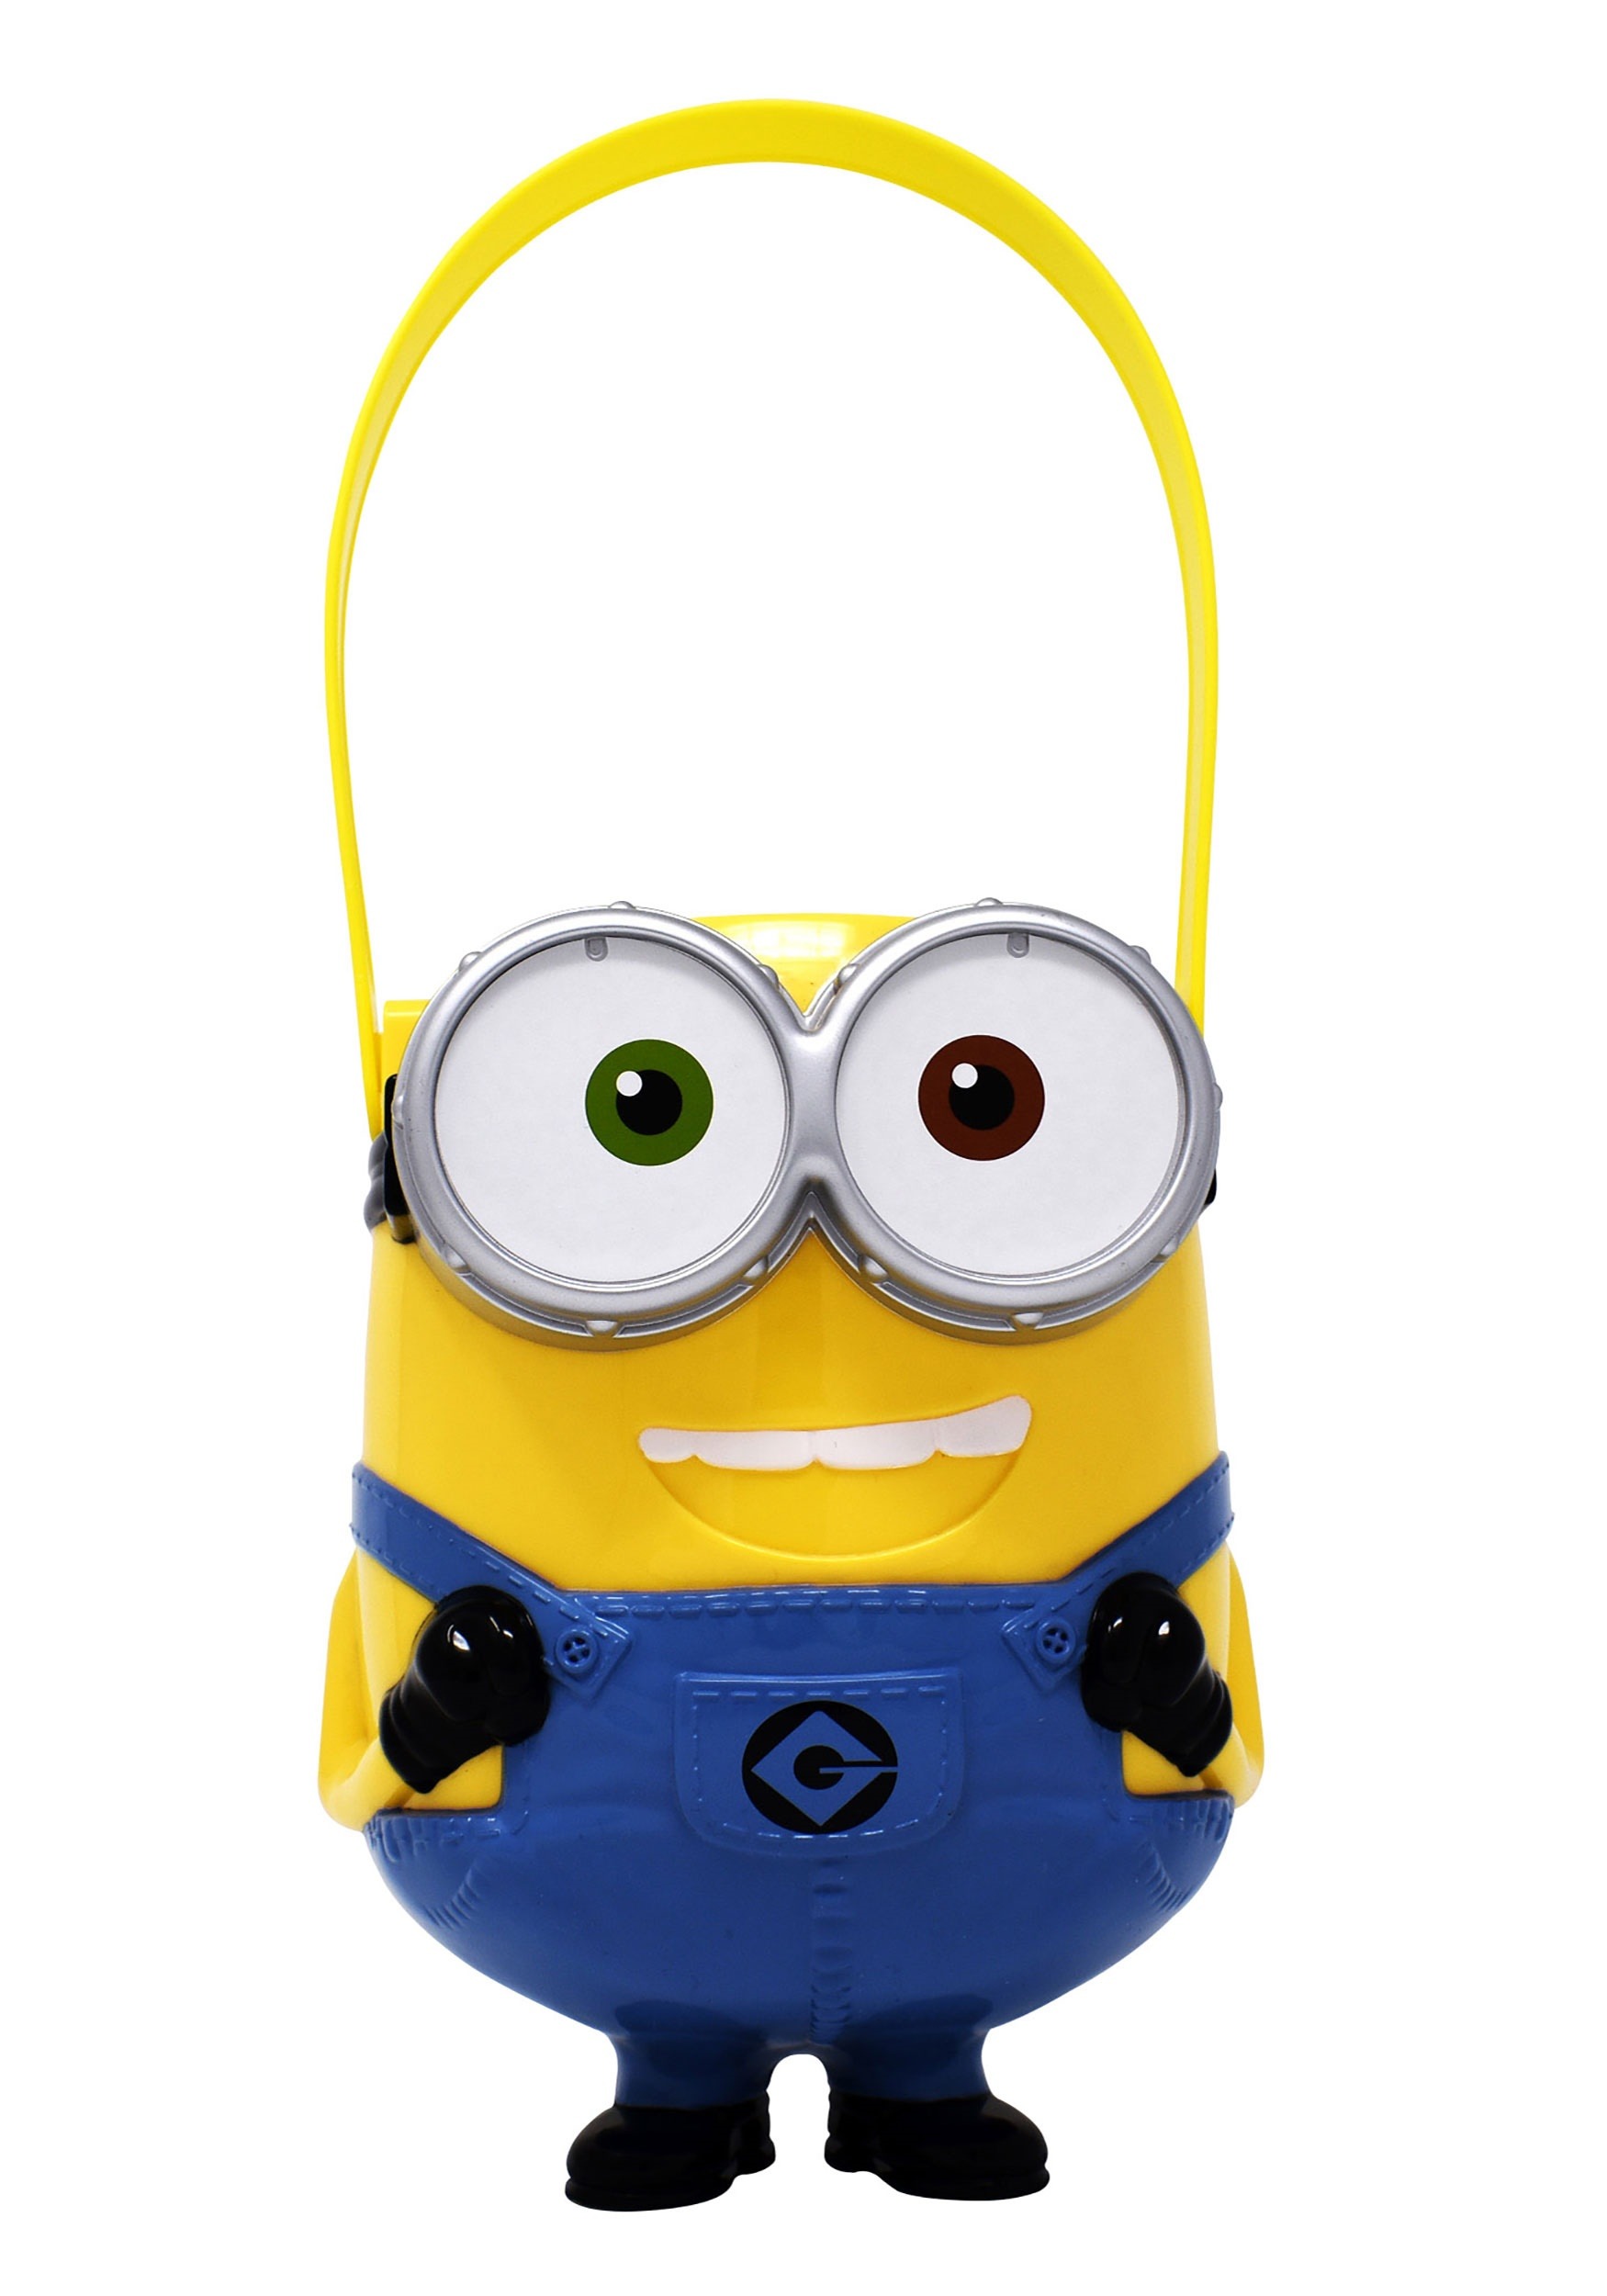 37 Minions Gift Ideas for Despicable Me Fans | Minion gifts, Lego minion,  Gifts